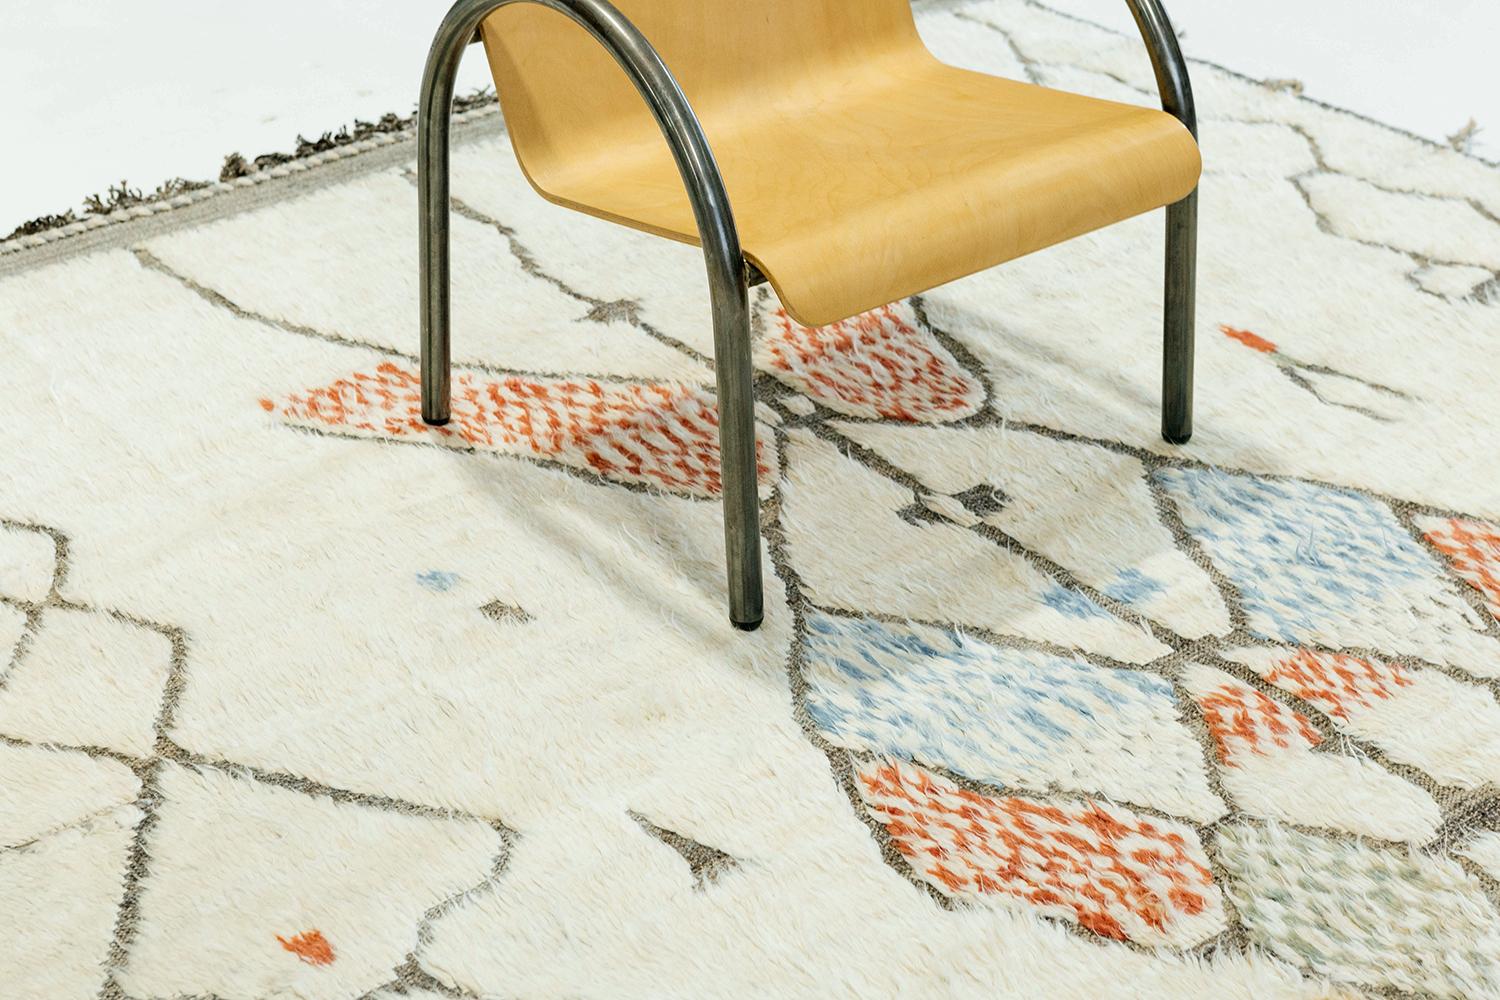 'Rebabi' is a unique wool shag that combines unique design elements and linework for the modern design world. Its weaving of natural earth tones and playful hints of colors is suitable for many interiors and is what makes the Atlas Collection so